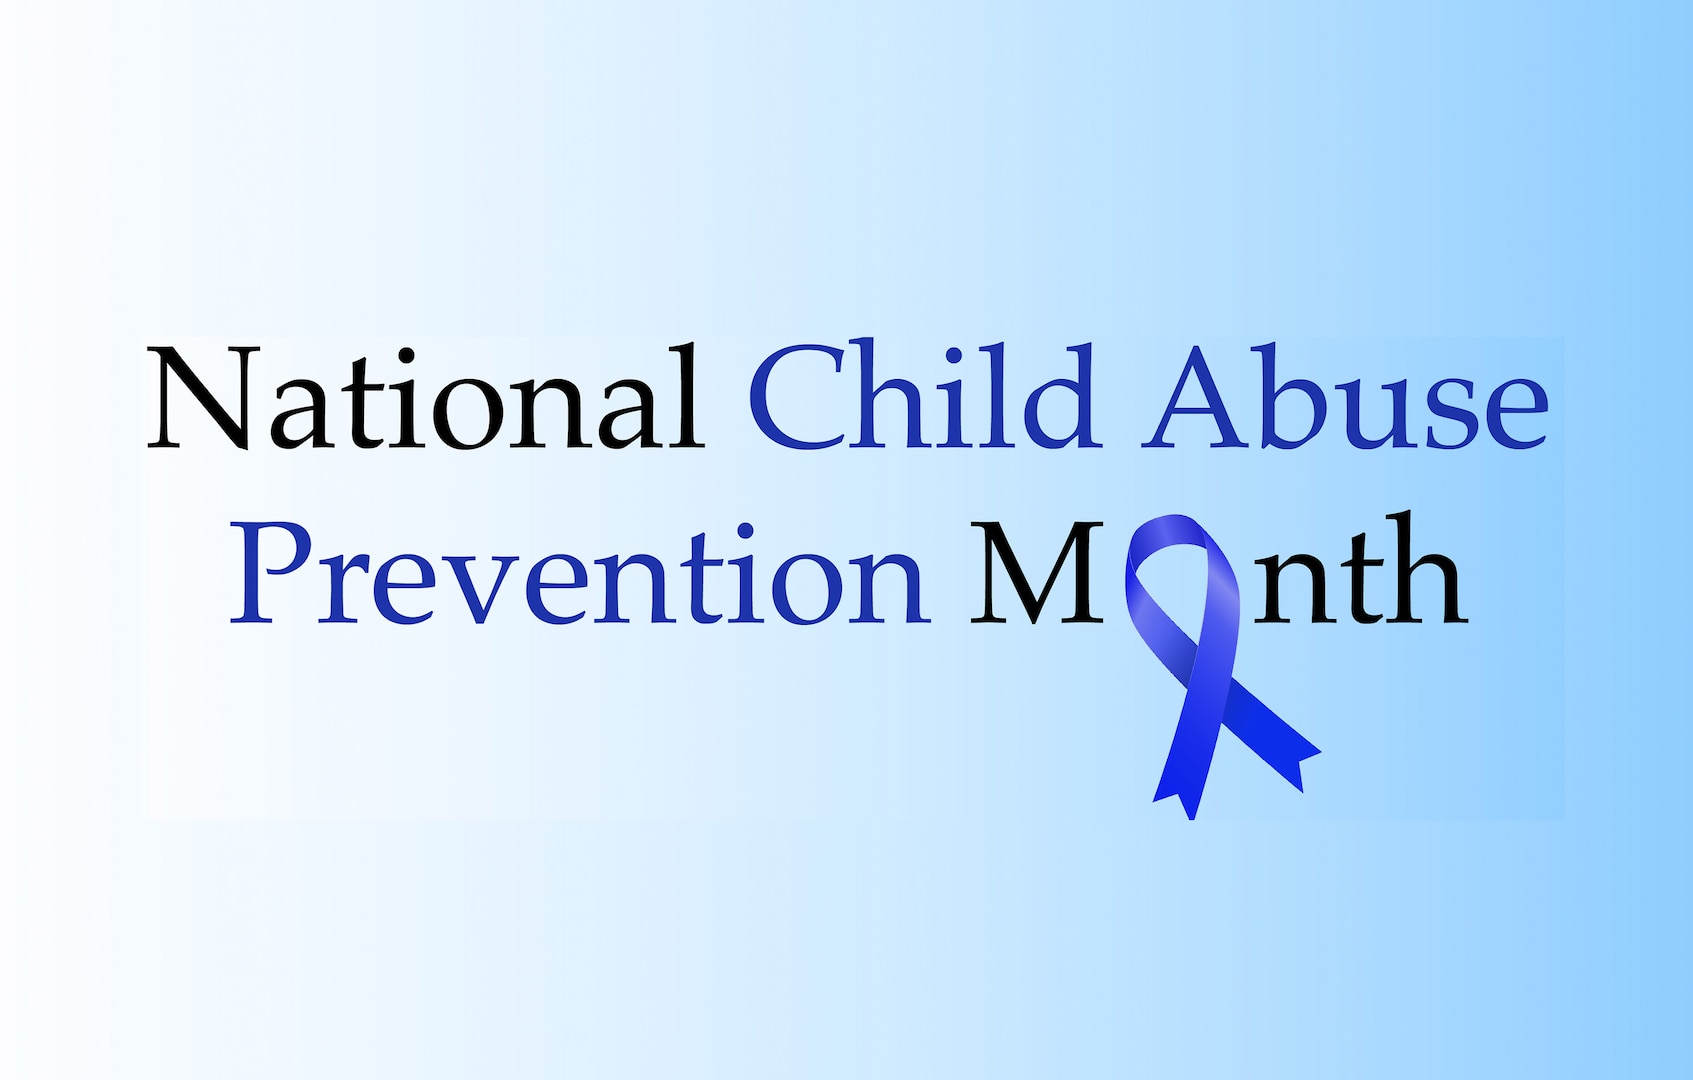 A graphic for National Child Abuse Prevention Month, with a blue ribbon.